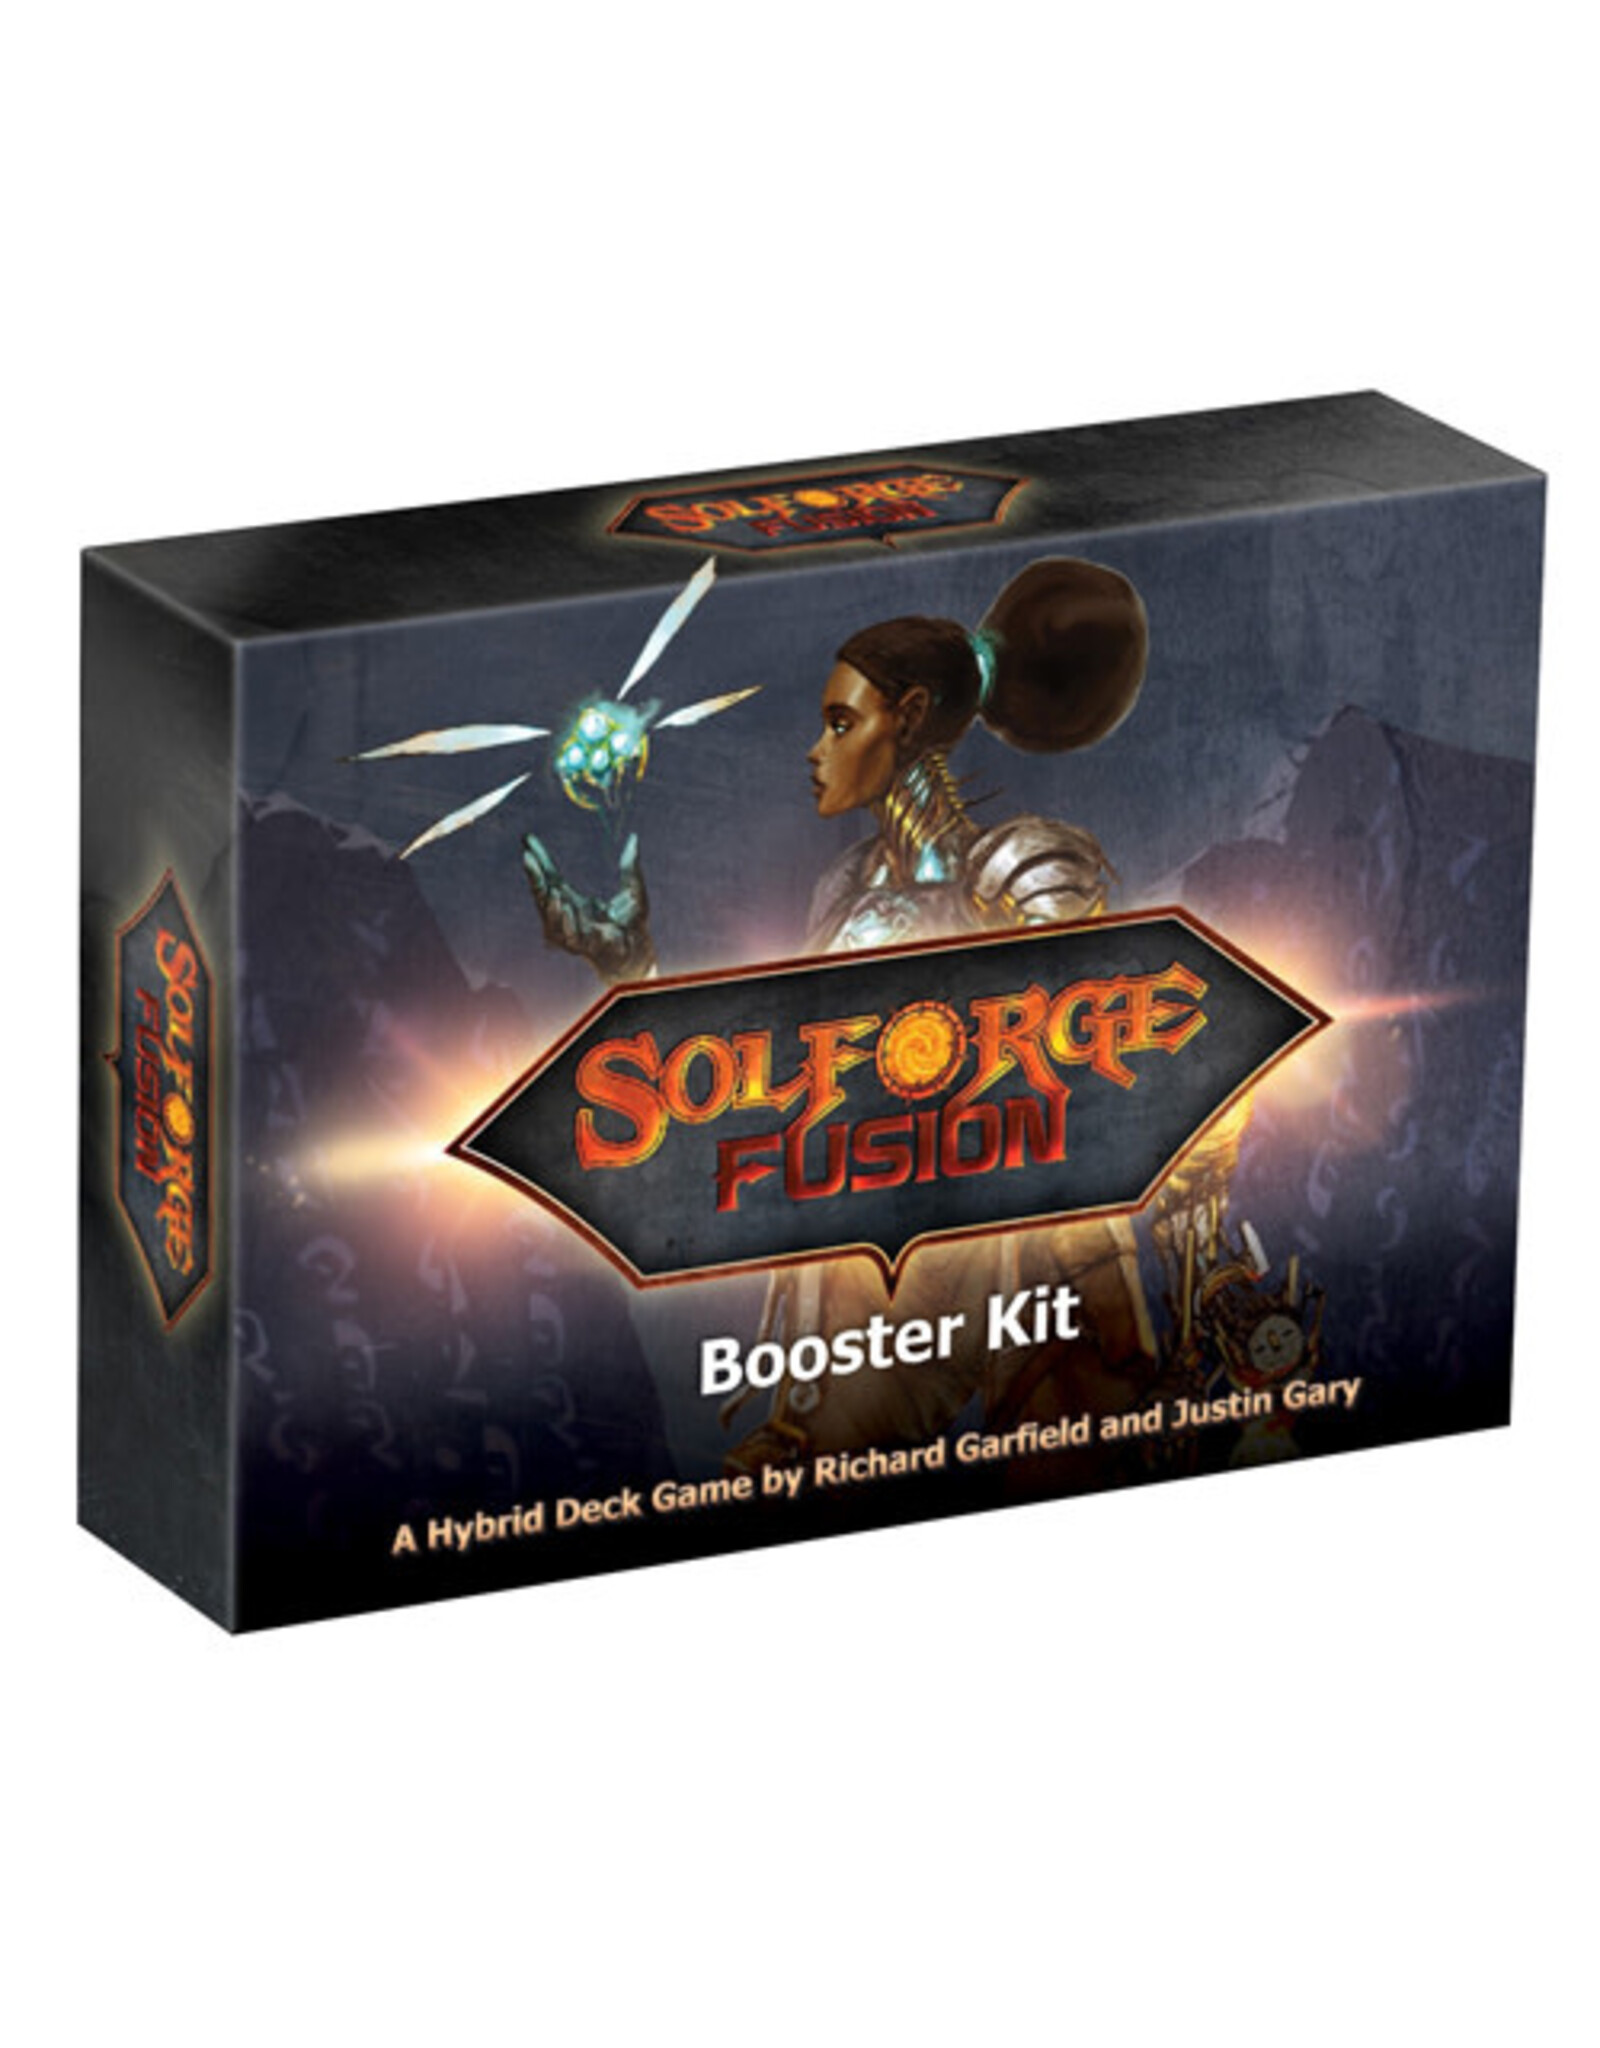 Solforge Fusion Booster